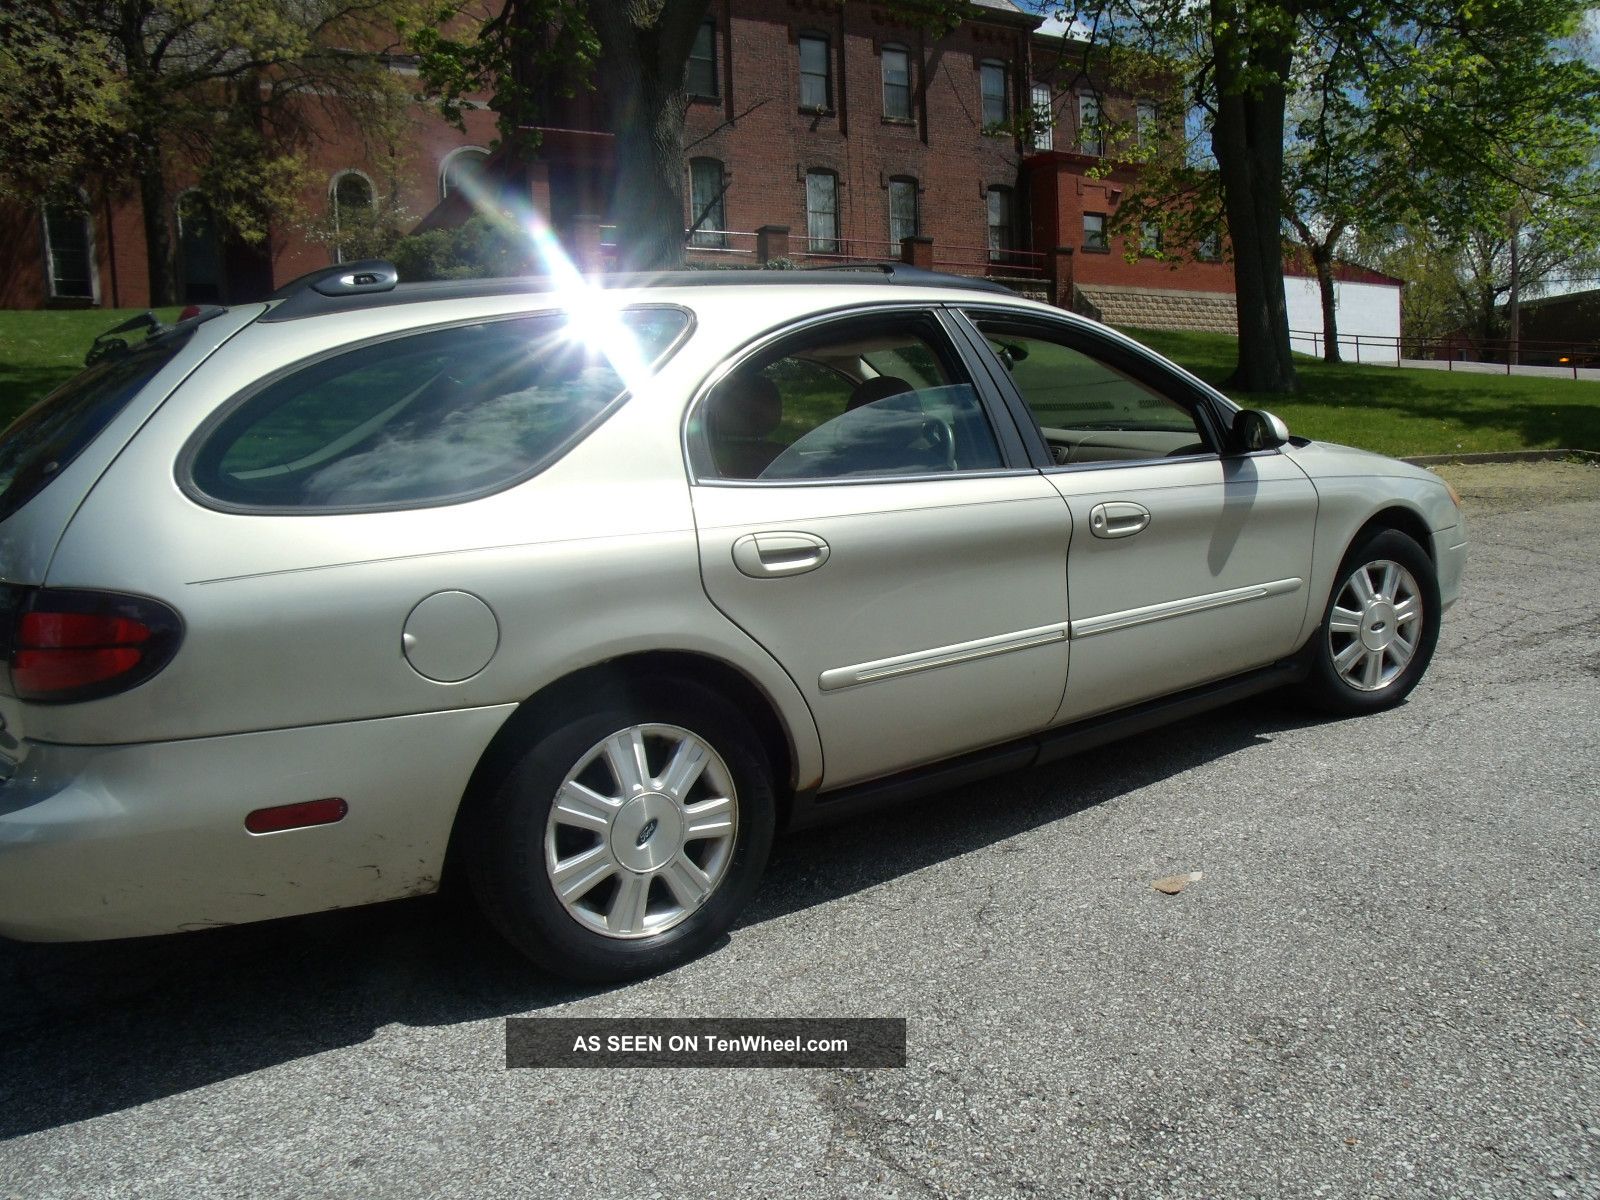 2003 Ford taurus se wagon review #3